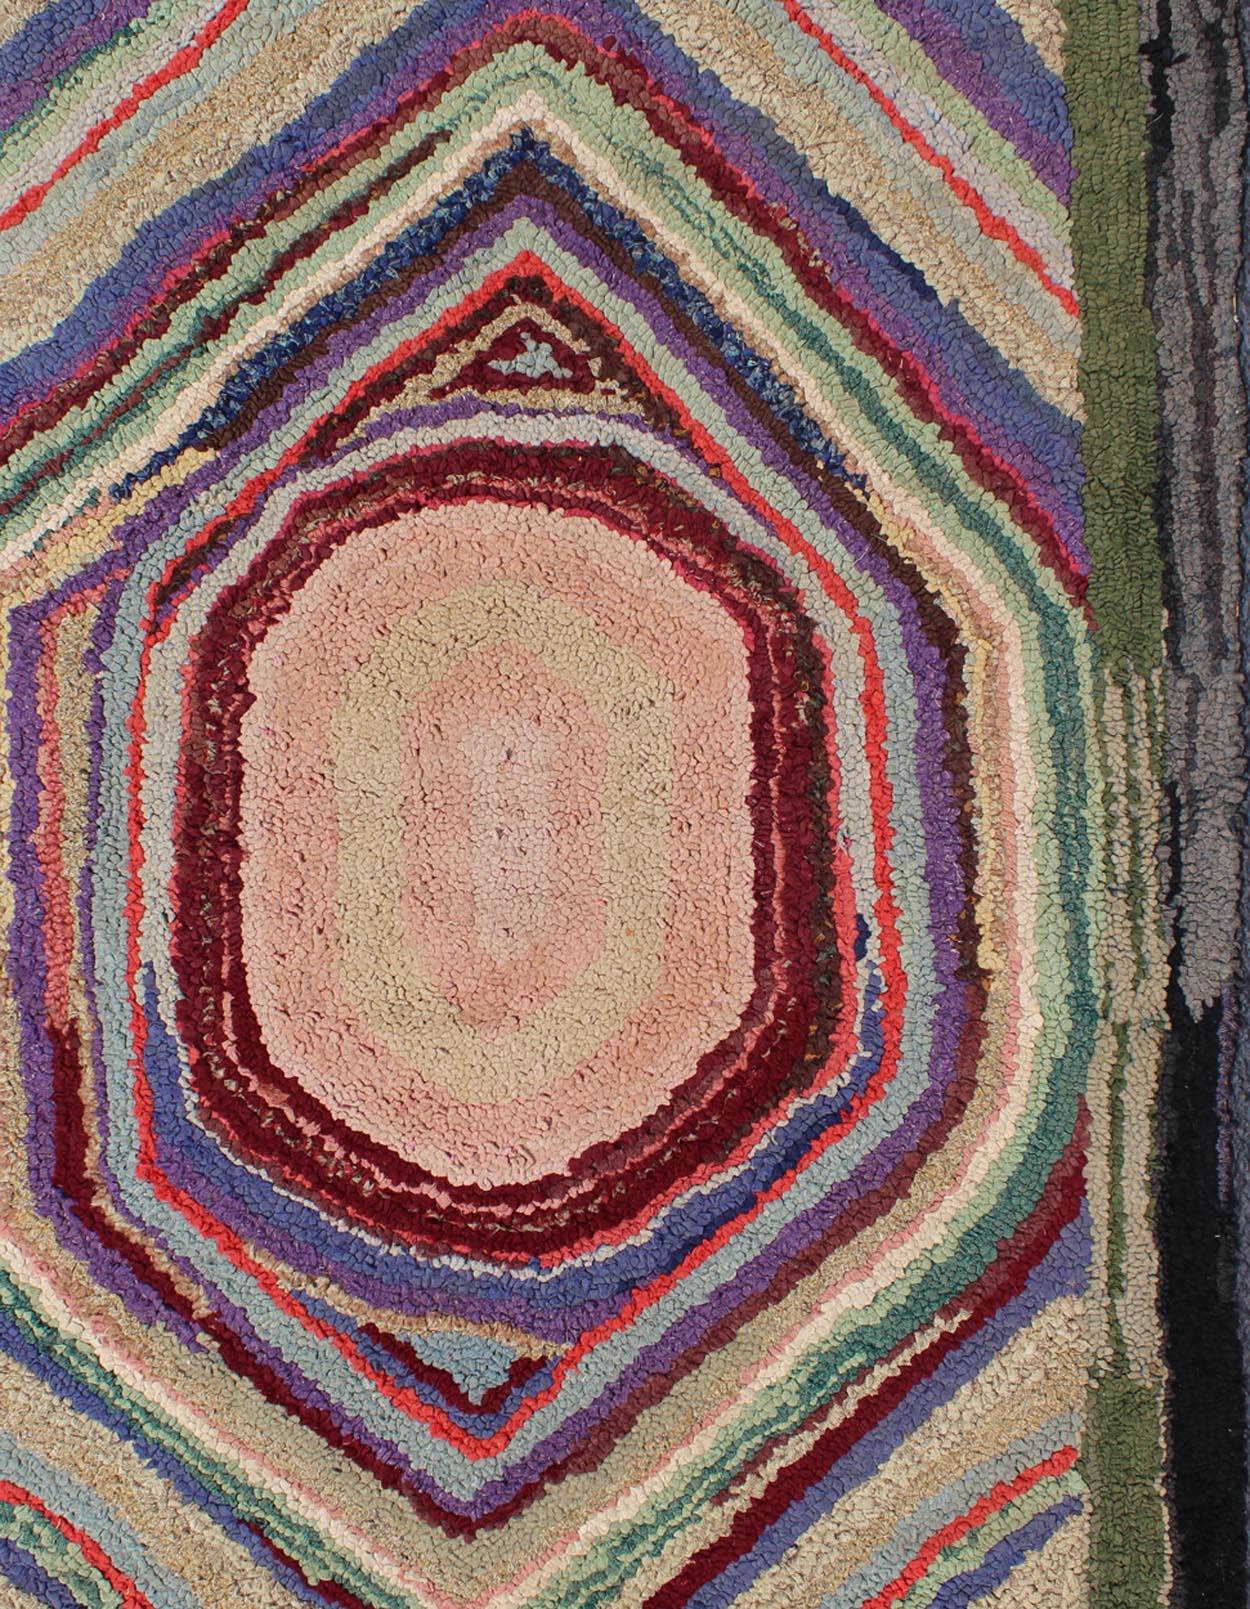 Hand-Knotted Antique Multicolor American Hooked Rug in Layered Diamond Design & Geometric For Sale